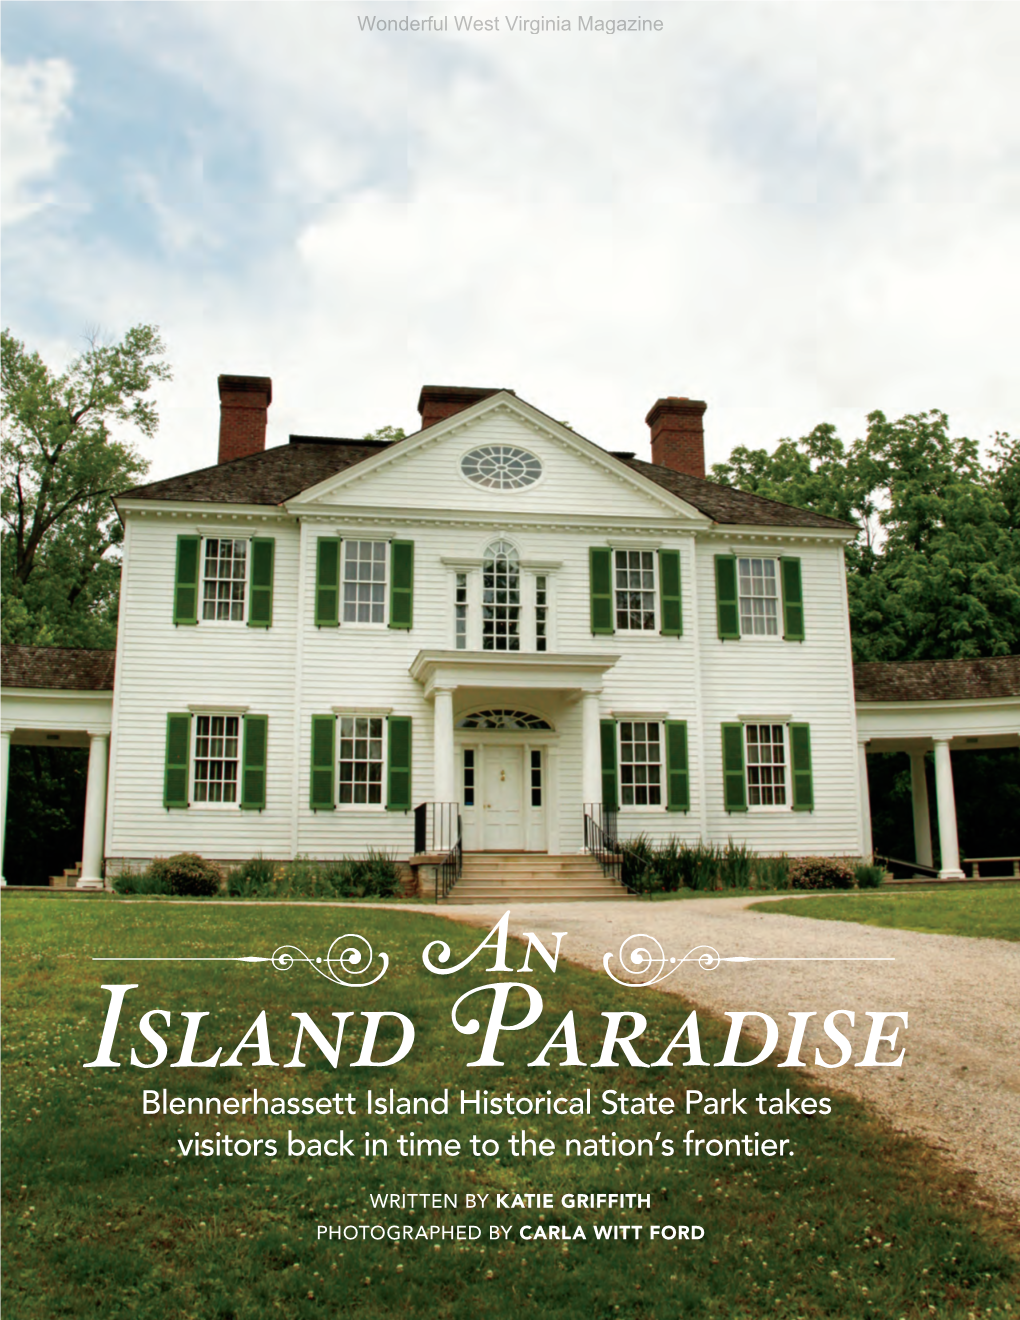 Blennerhassett Island Historical State Park Takes Visitors Back in Time to the Nation's Frontier